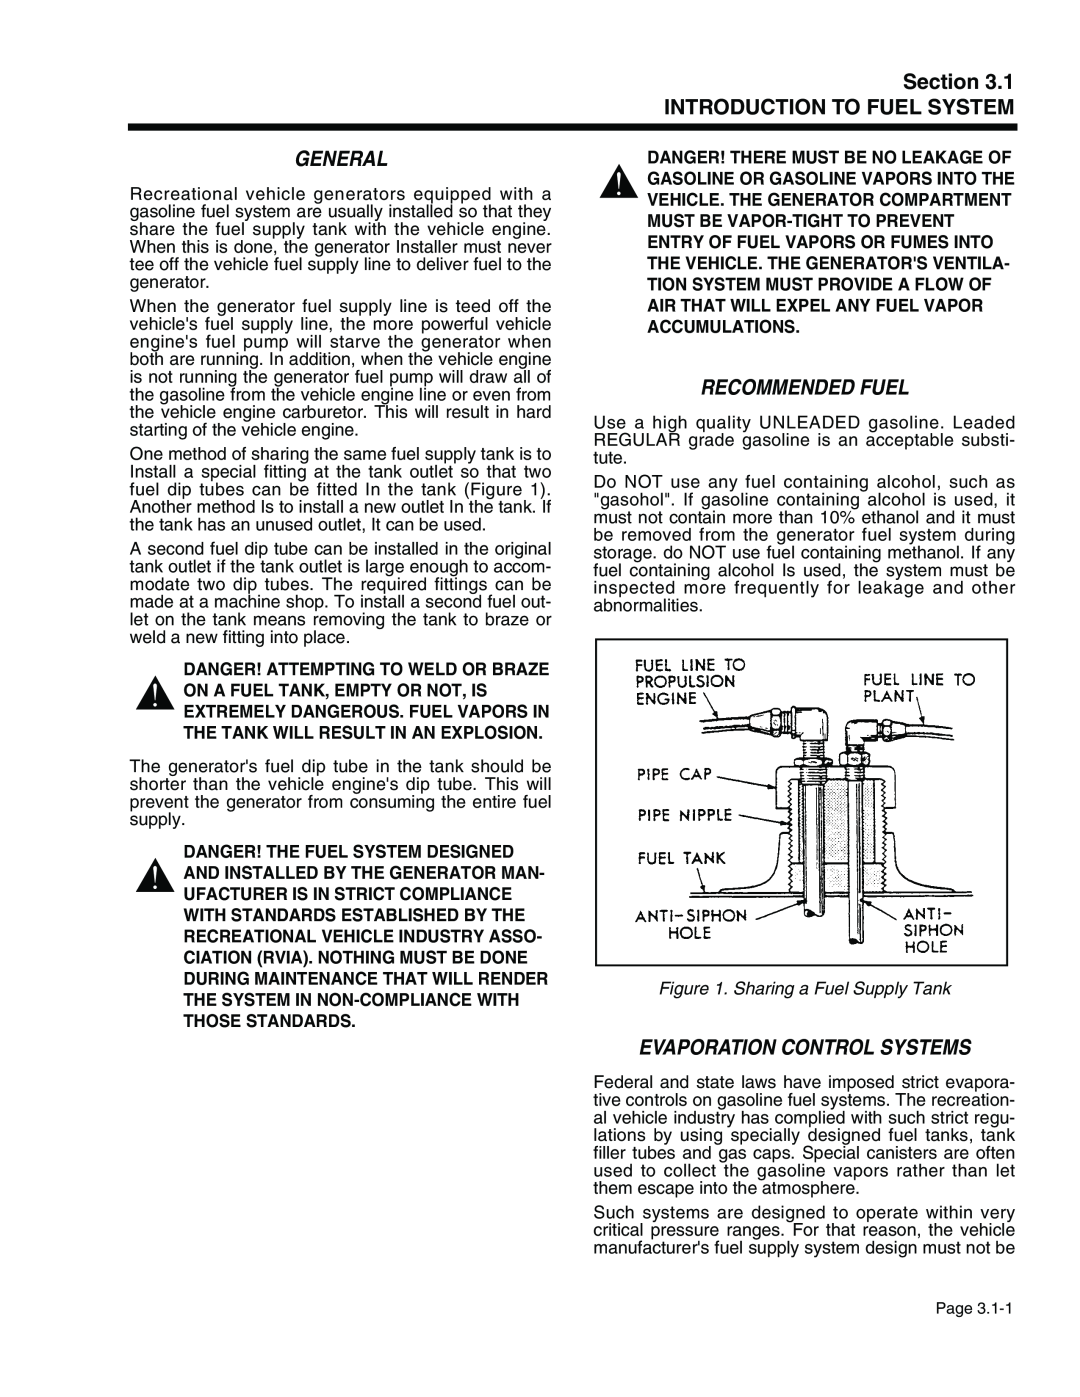 Generac Power Systems 941-2 Section INTRODUCTION TO FUEL SYSTEM, Recommended Fuel, Evaporation Control Systems, General 